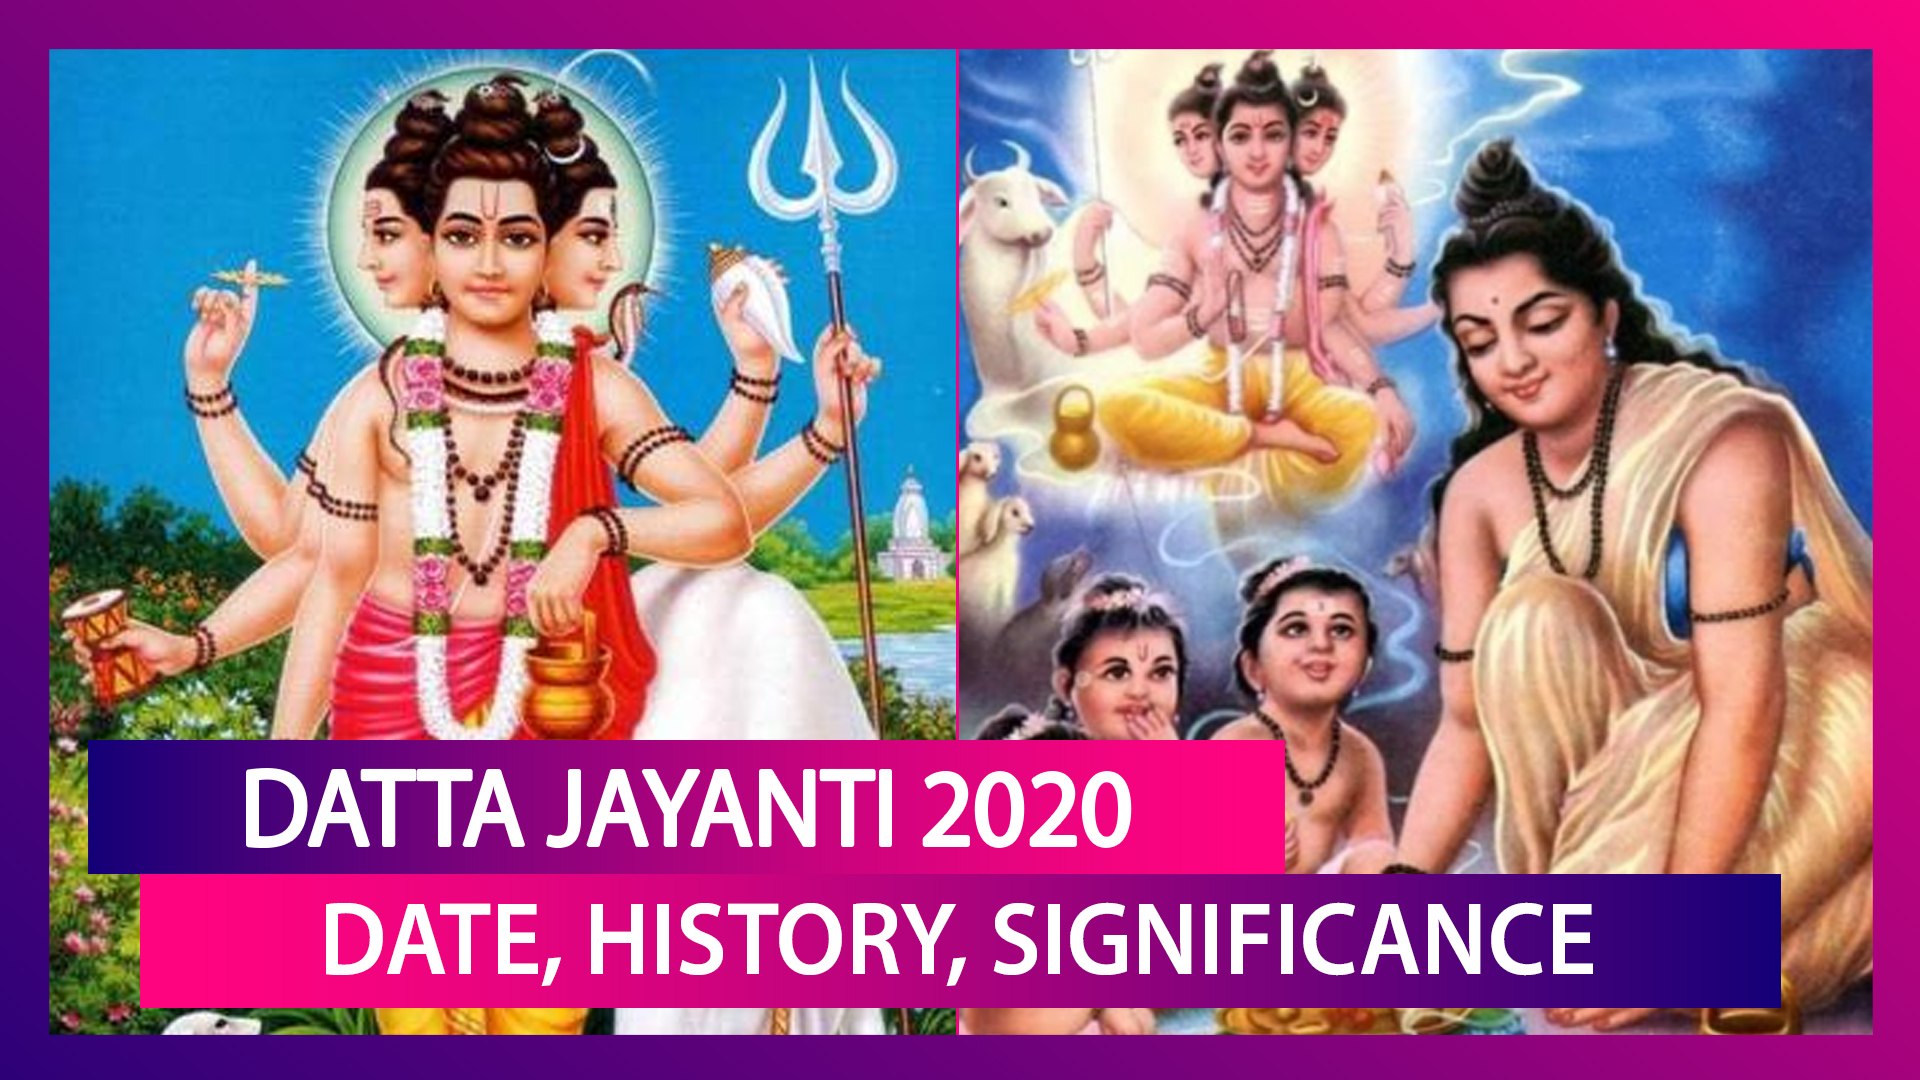 Datta Jayanti 2020: Date, History, Significance Of The Day Marking Birth  Anniversary Of Lord Dattatreya, The Divine Trinity - video Dailymotion